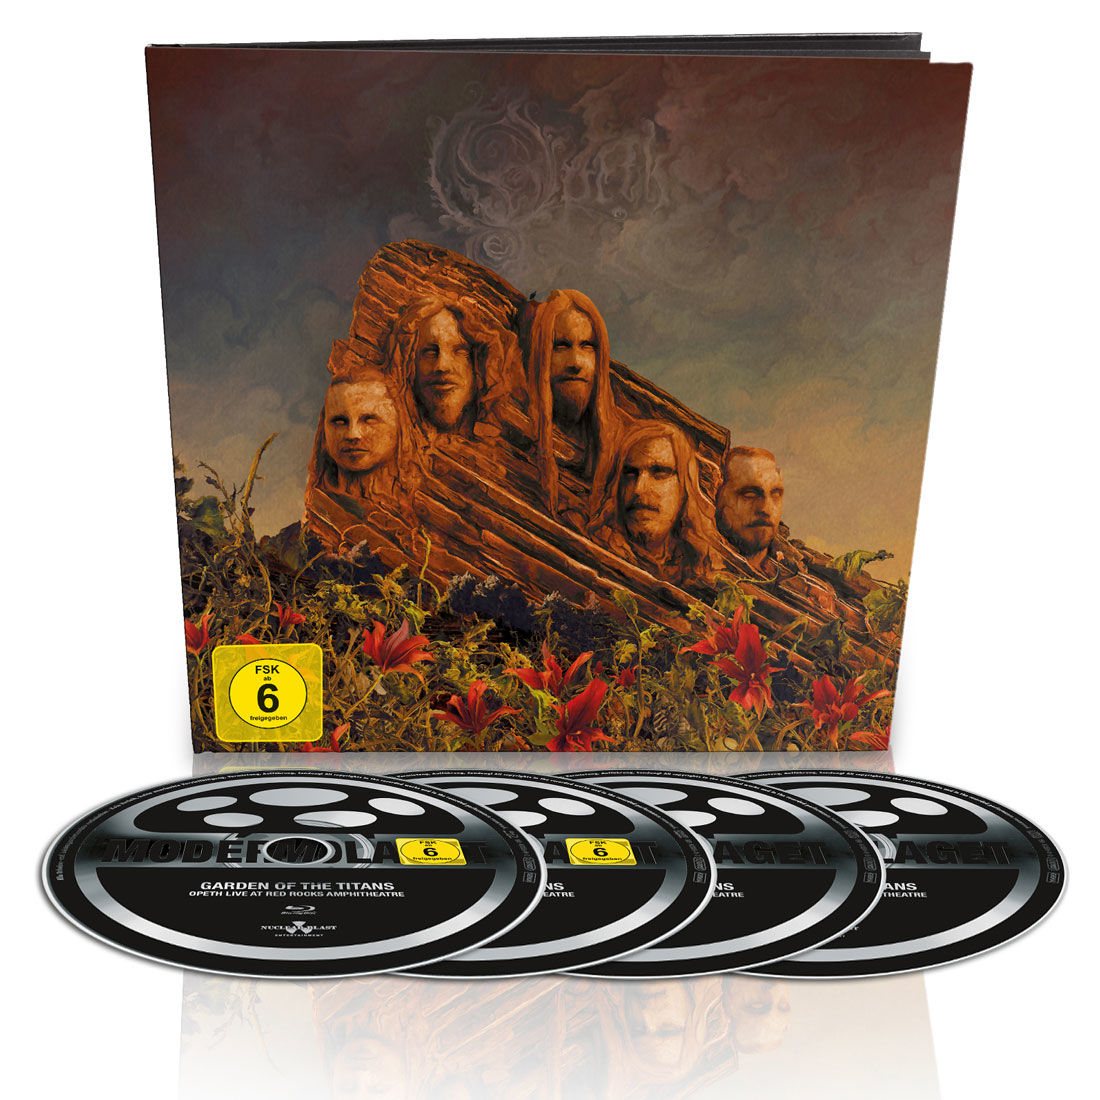 Opeth - Garden Of The Titans (Live At Red Rocks Ampitheatre): Limited Blu-Ray/DVD/2CD Earbook